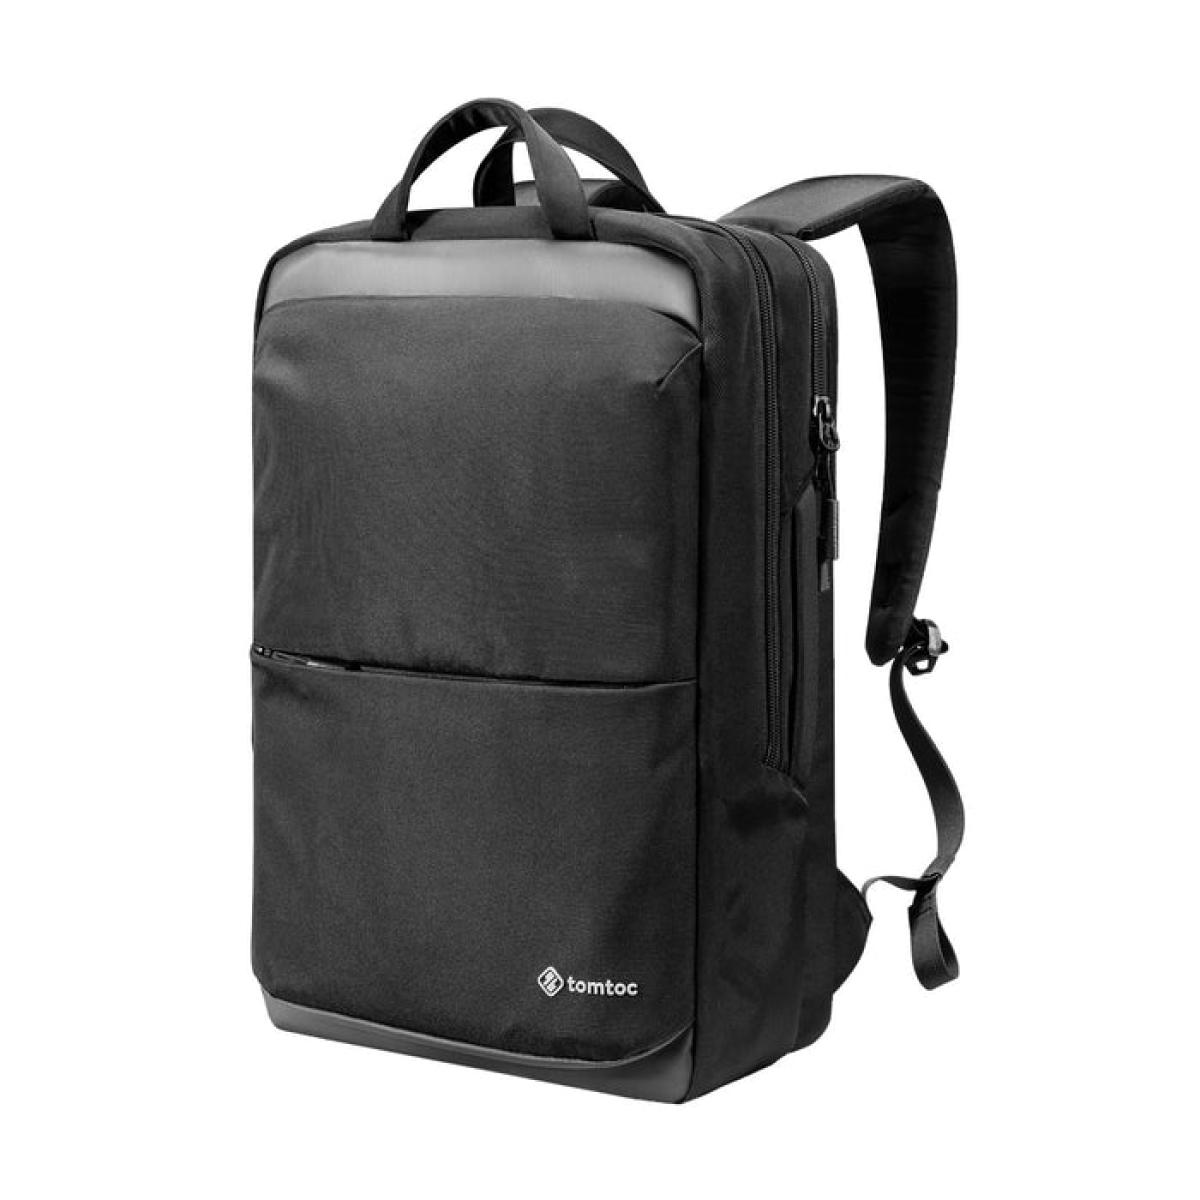 tomtoc Premium Laptop Backpack For Commuting and Travel | Black